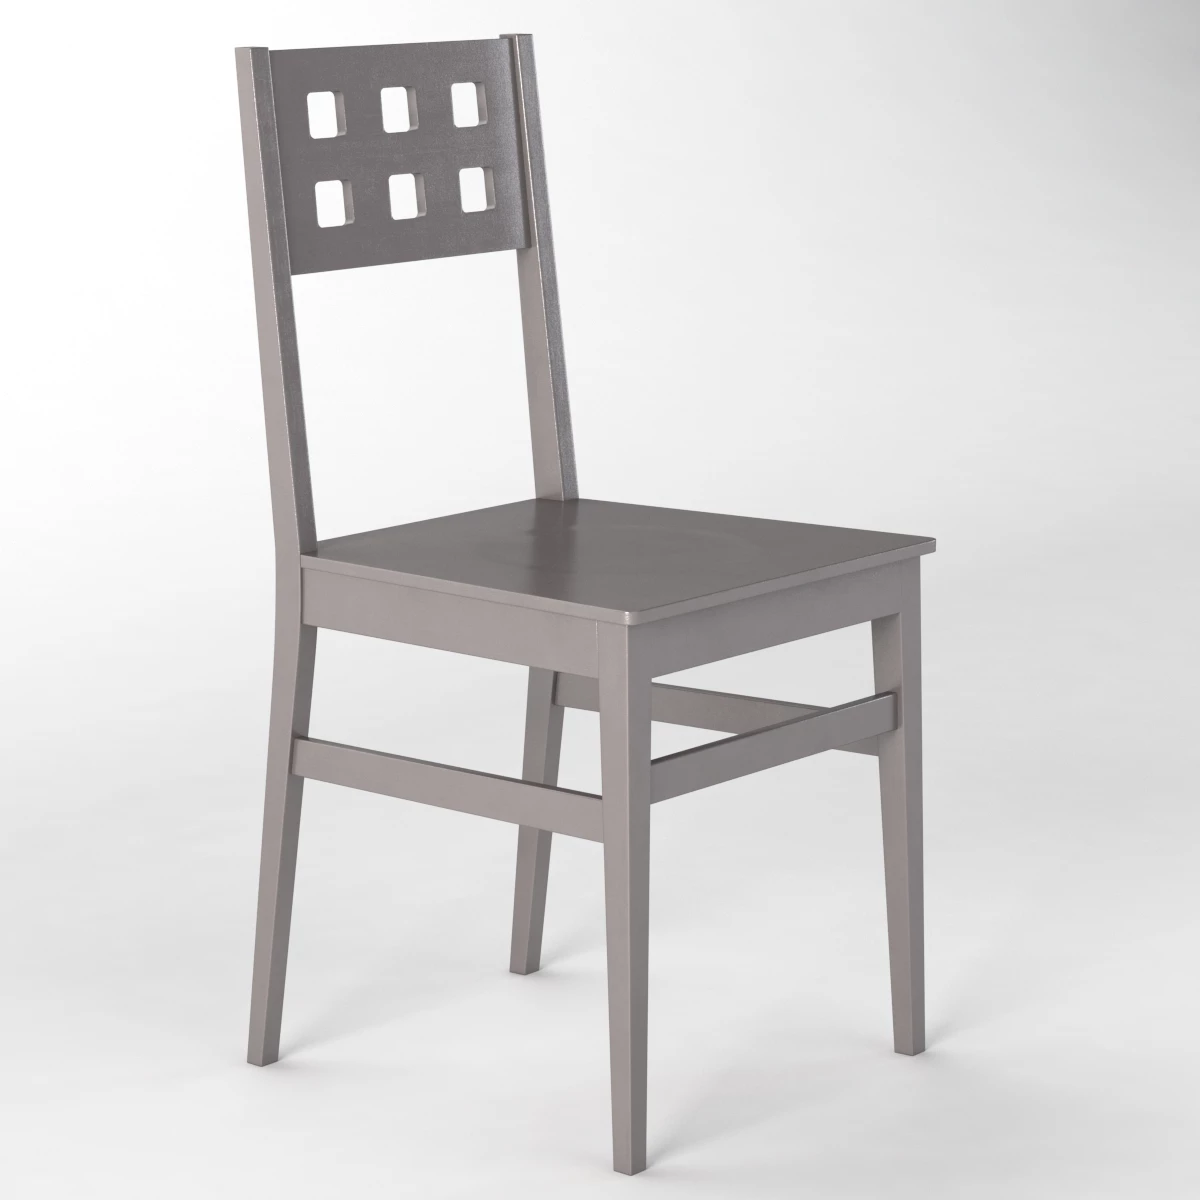 Creo Kitchens Arnica Dining Chair 3D Model_01